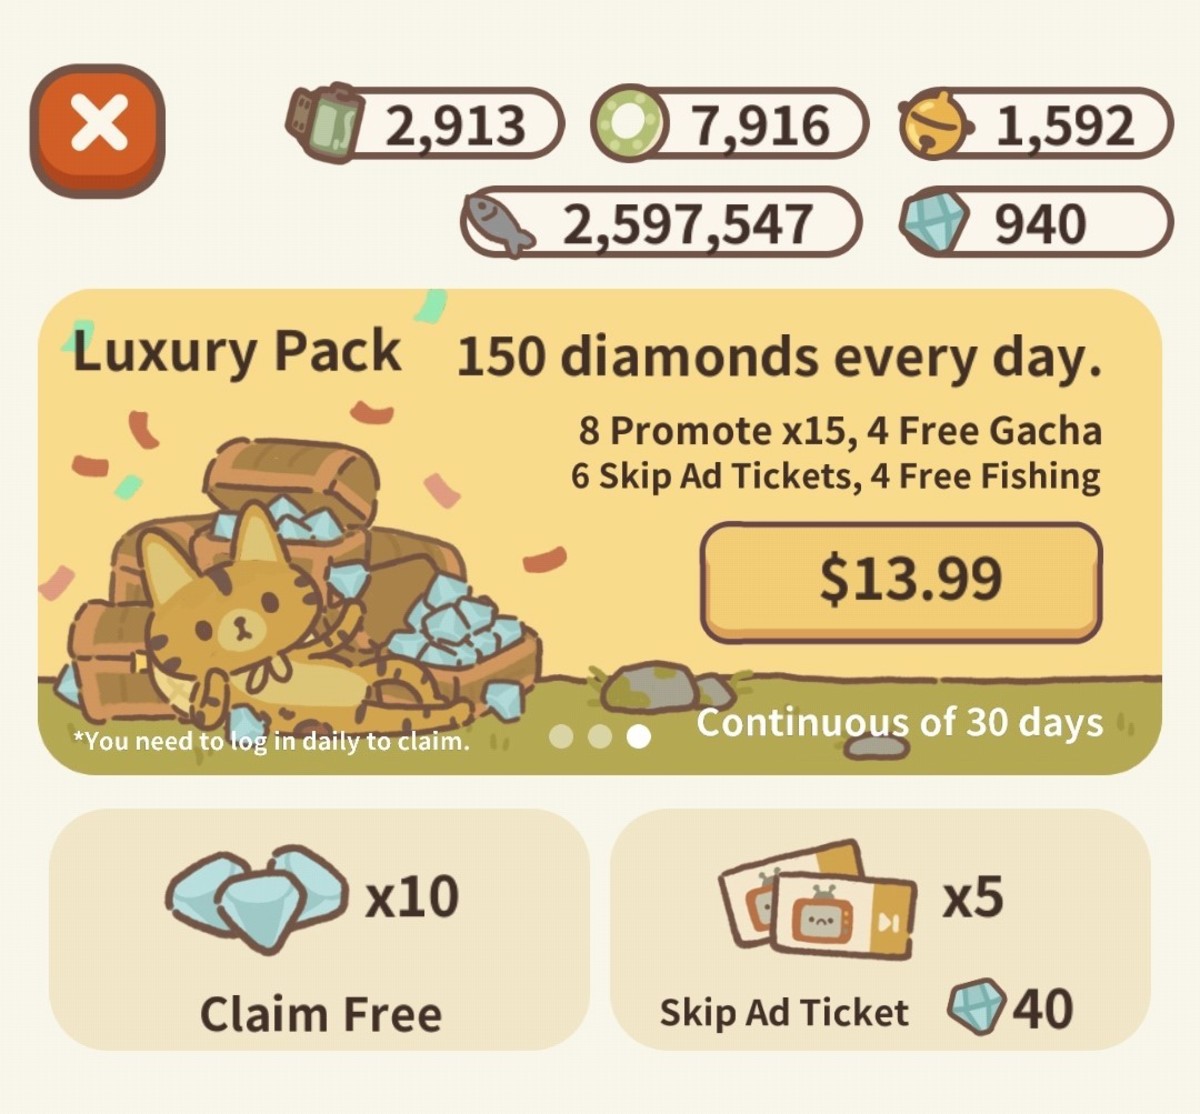 Don't forget to collect 10 free Diamonds every day!  Diamonds can be used to buy other currency (cod, film, or bells) or buy Skip Ad Tickets!